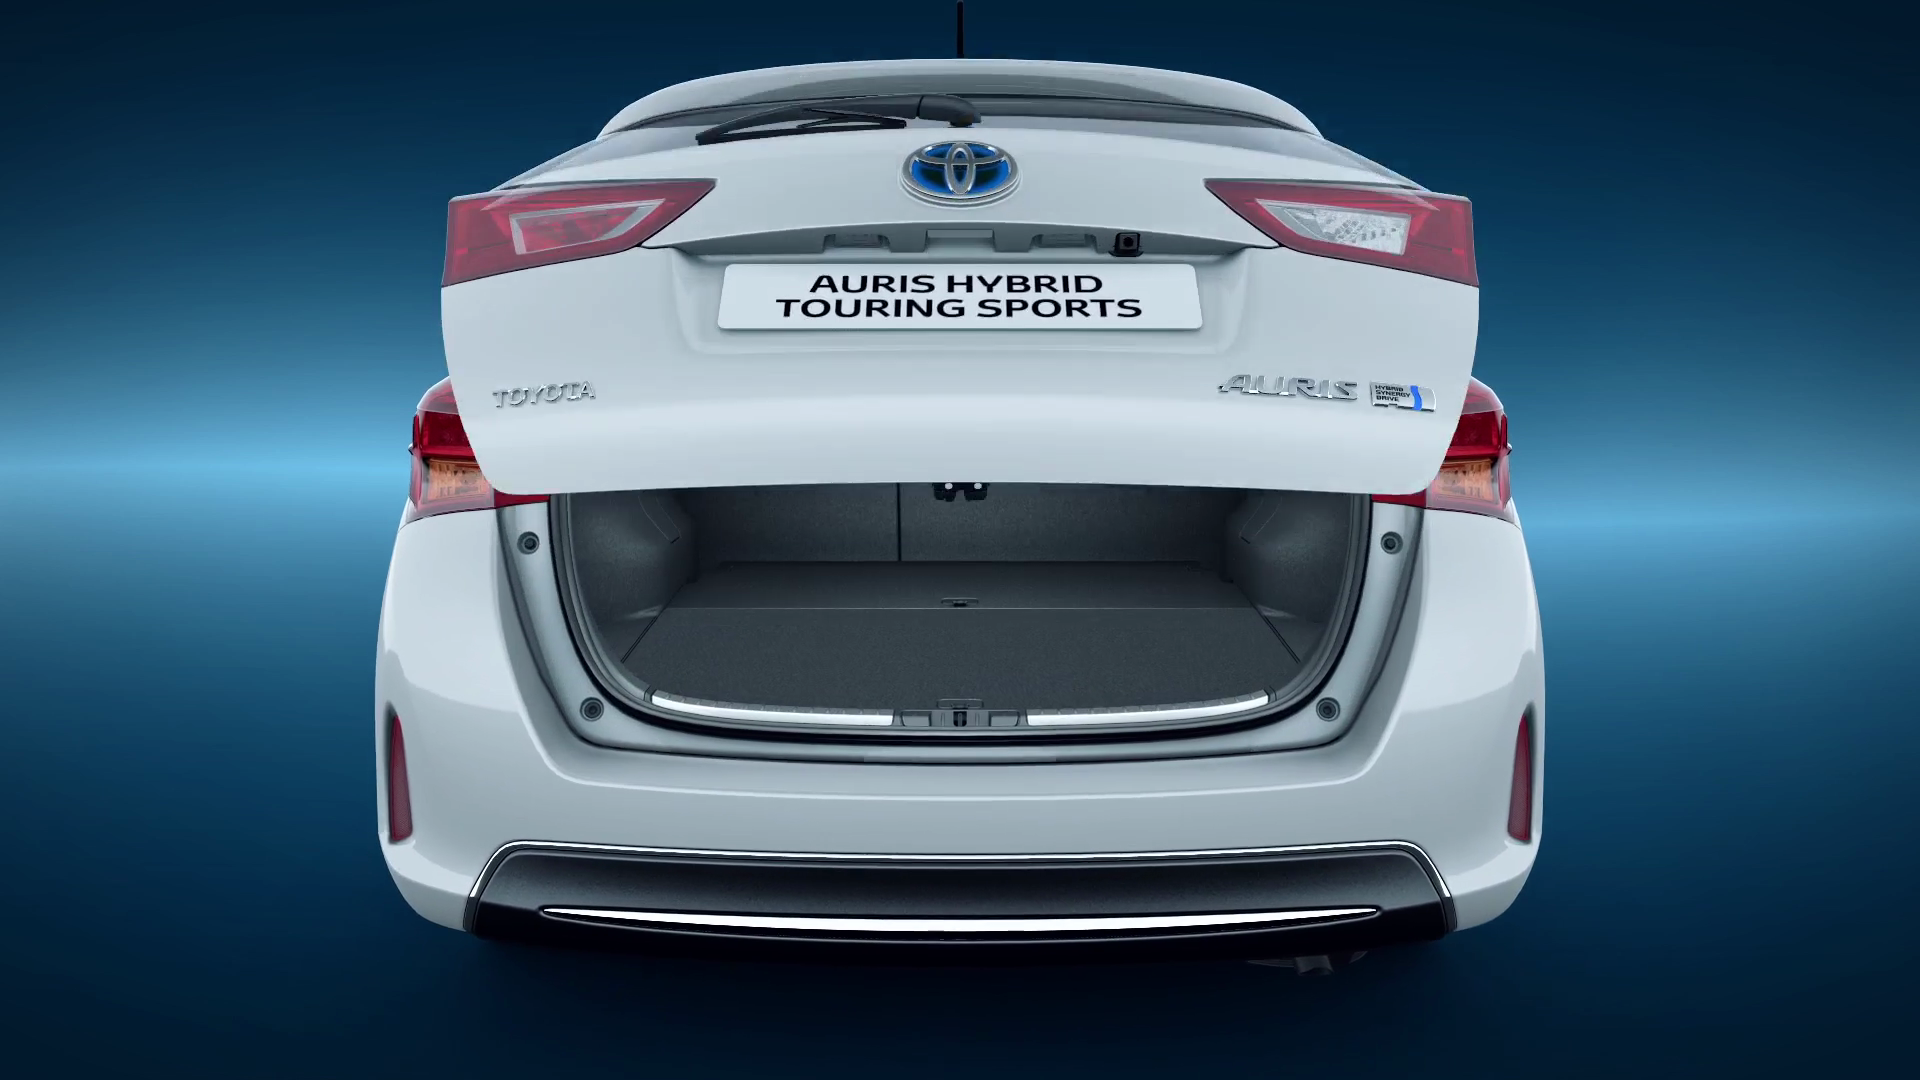 Auris Hybrid Touring Sports Functionality Without Captions